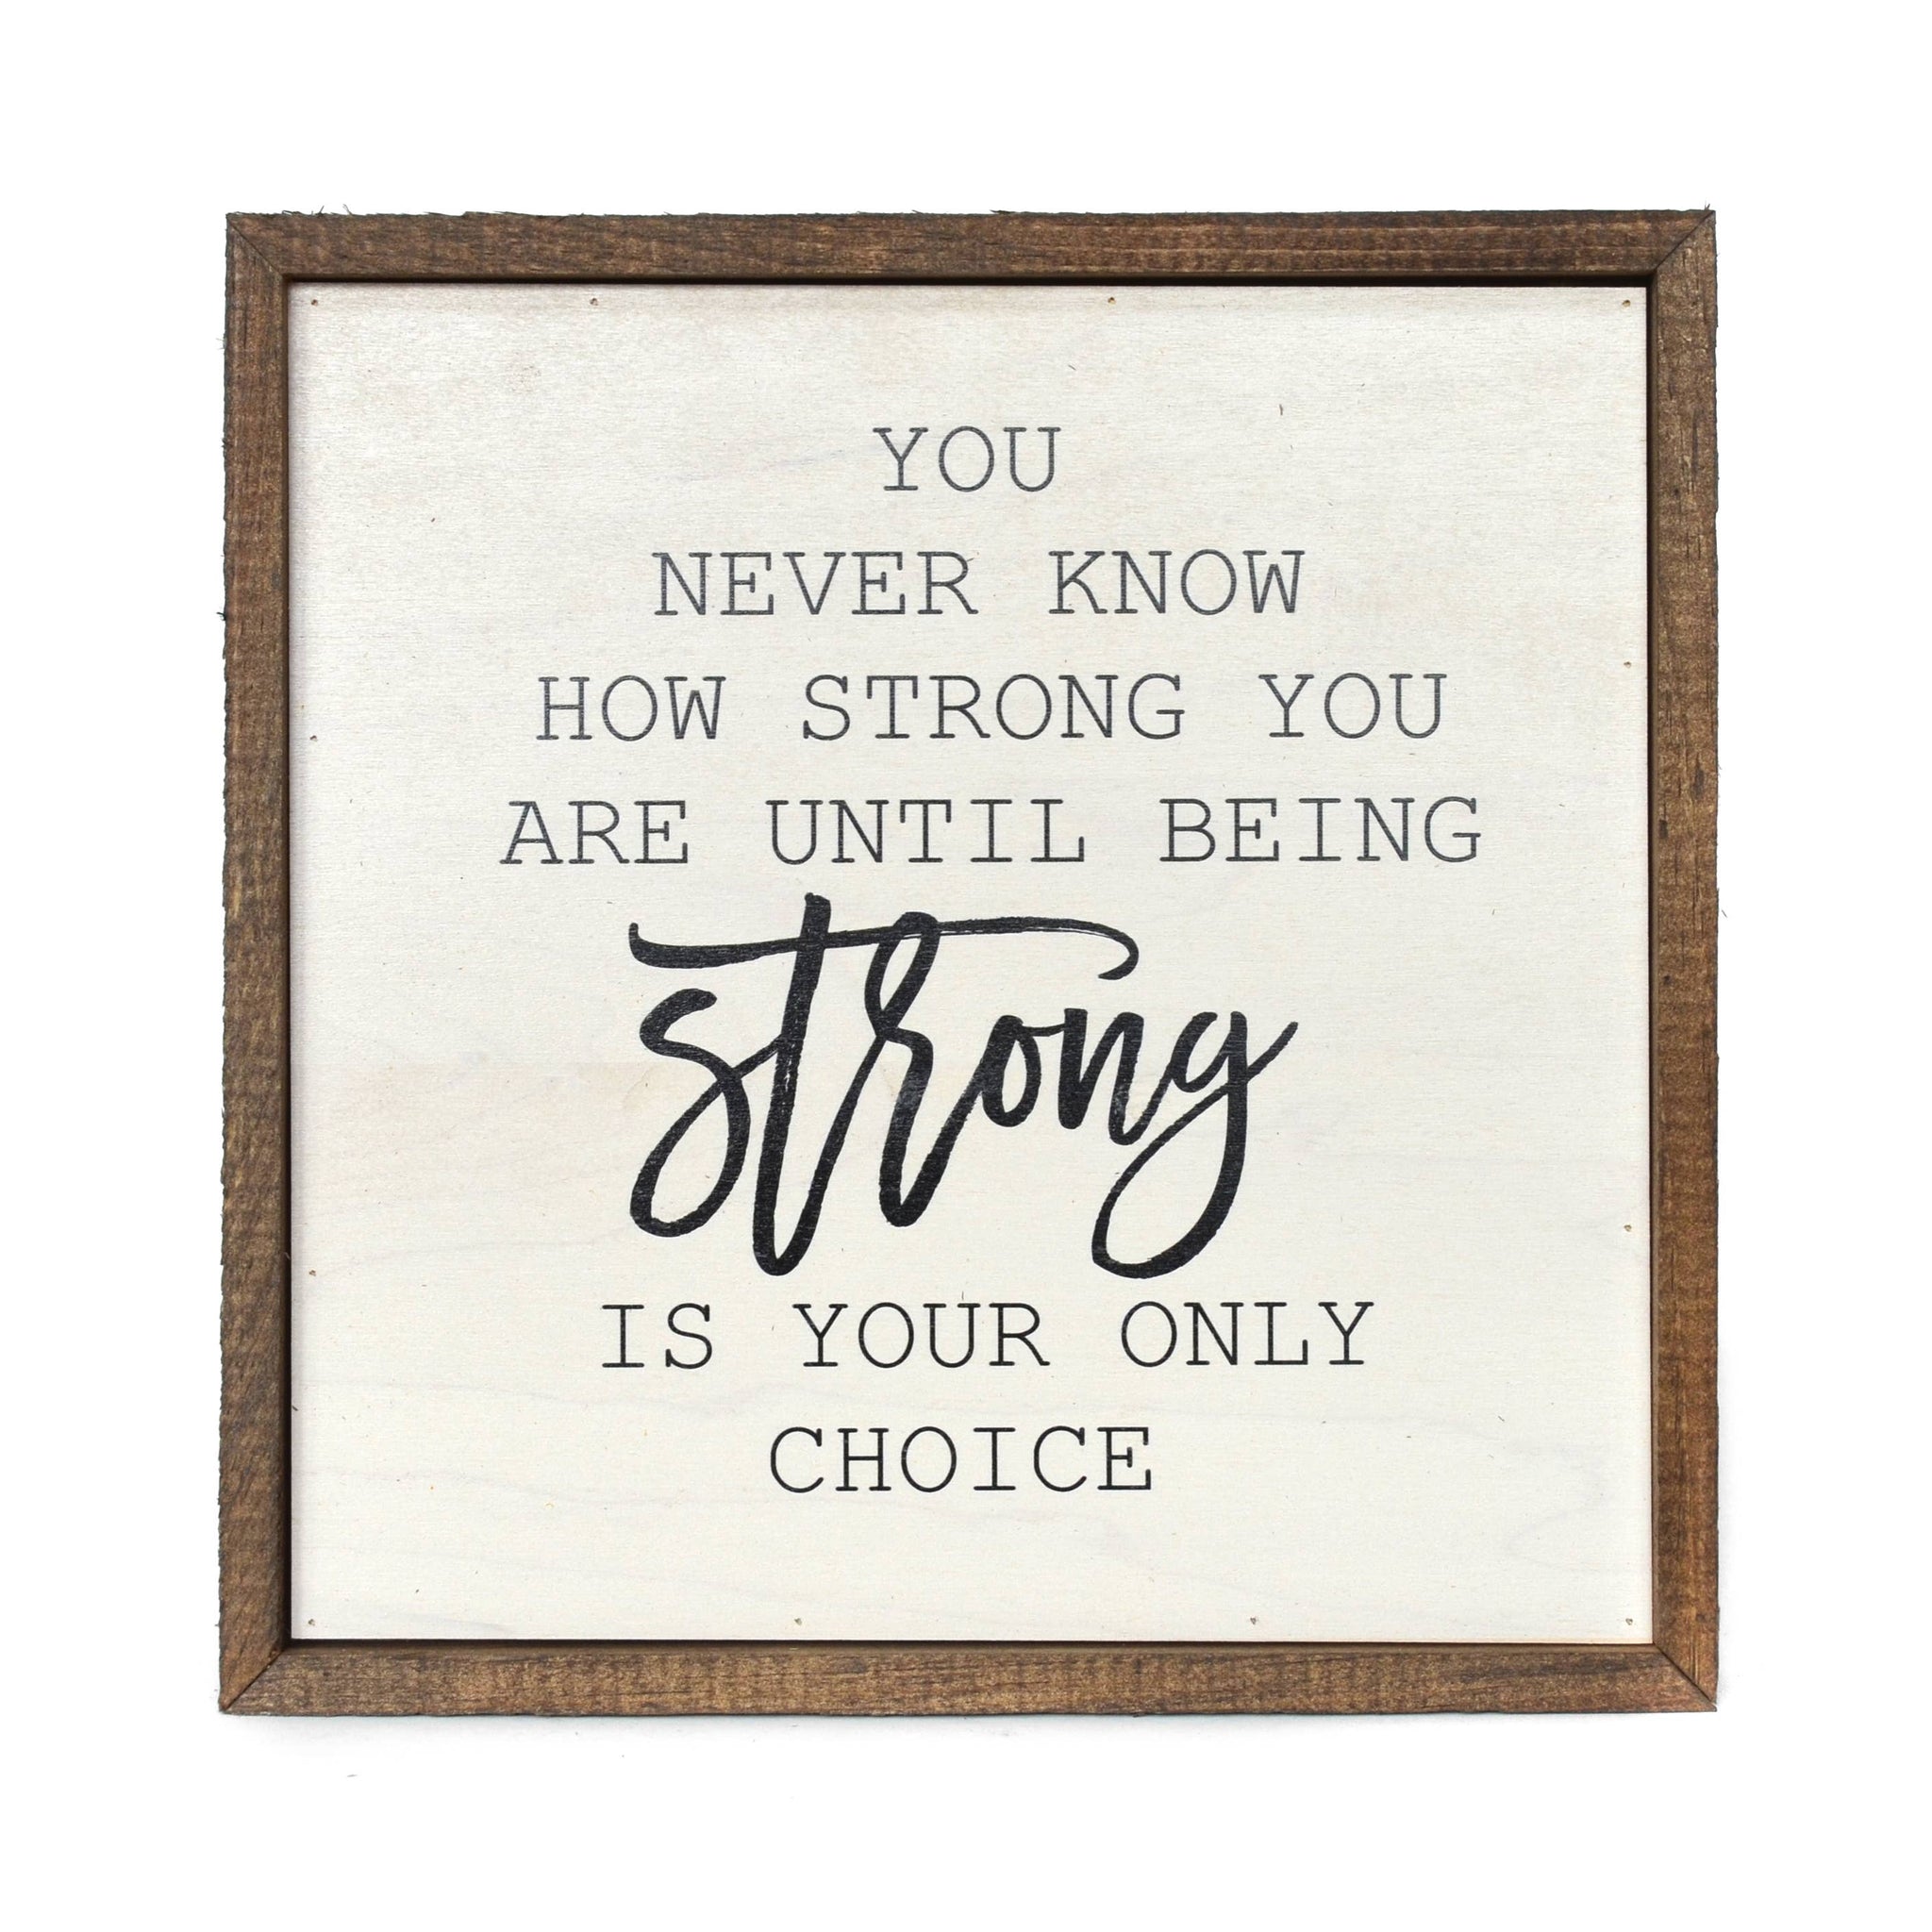 Driftless Studios - 10x10 You Never Know How Strong You Are Wall Hanging